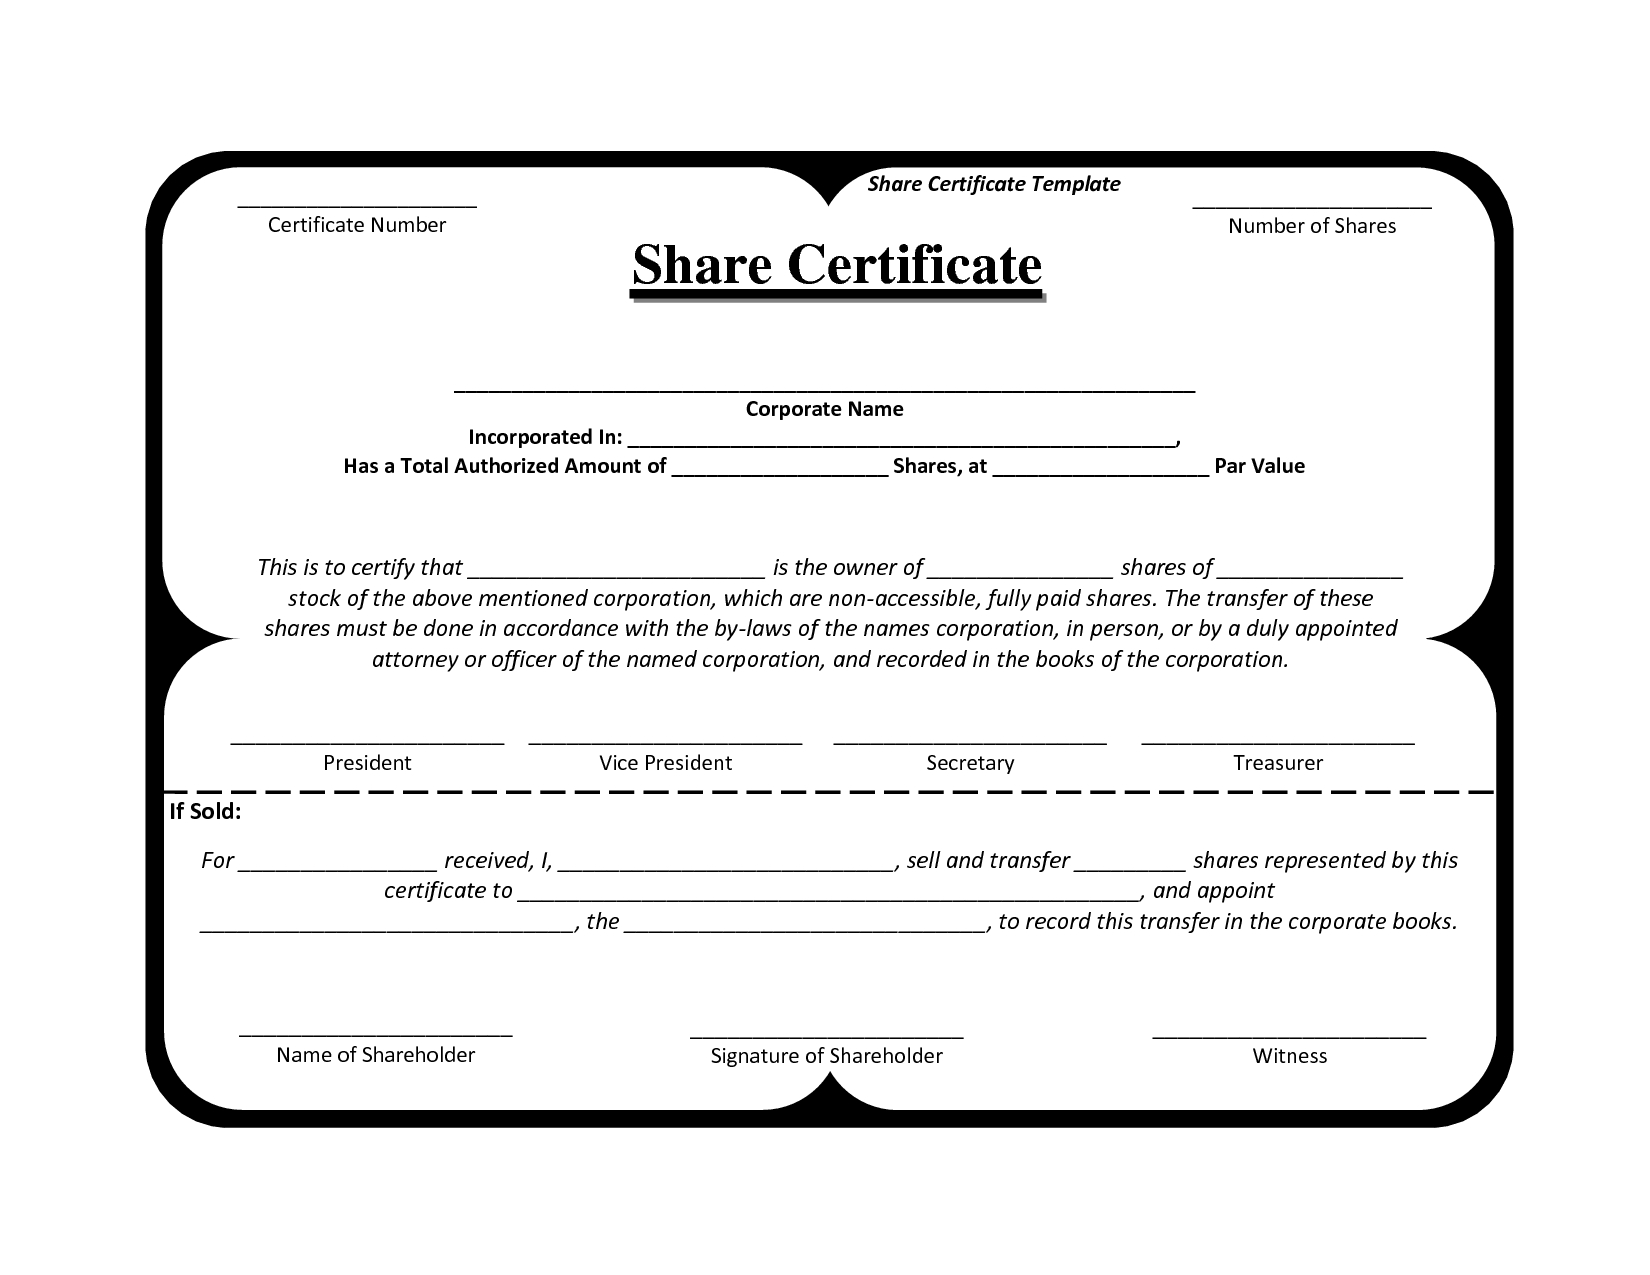 Template Share Certificate Rbscqi9V | Share Certificate In In Template For Share Certificate